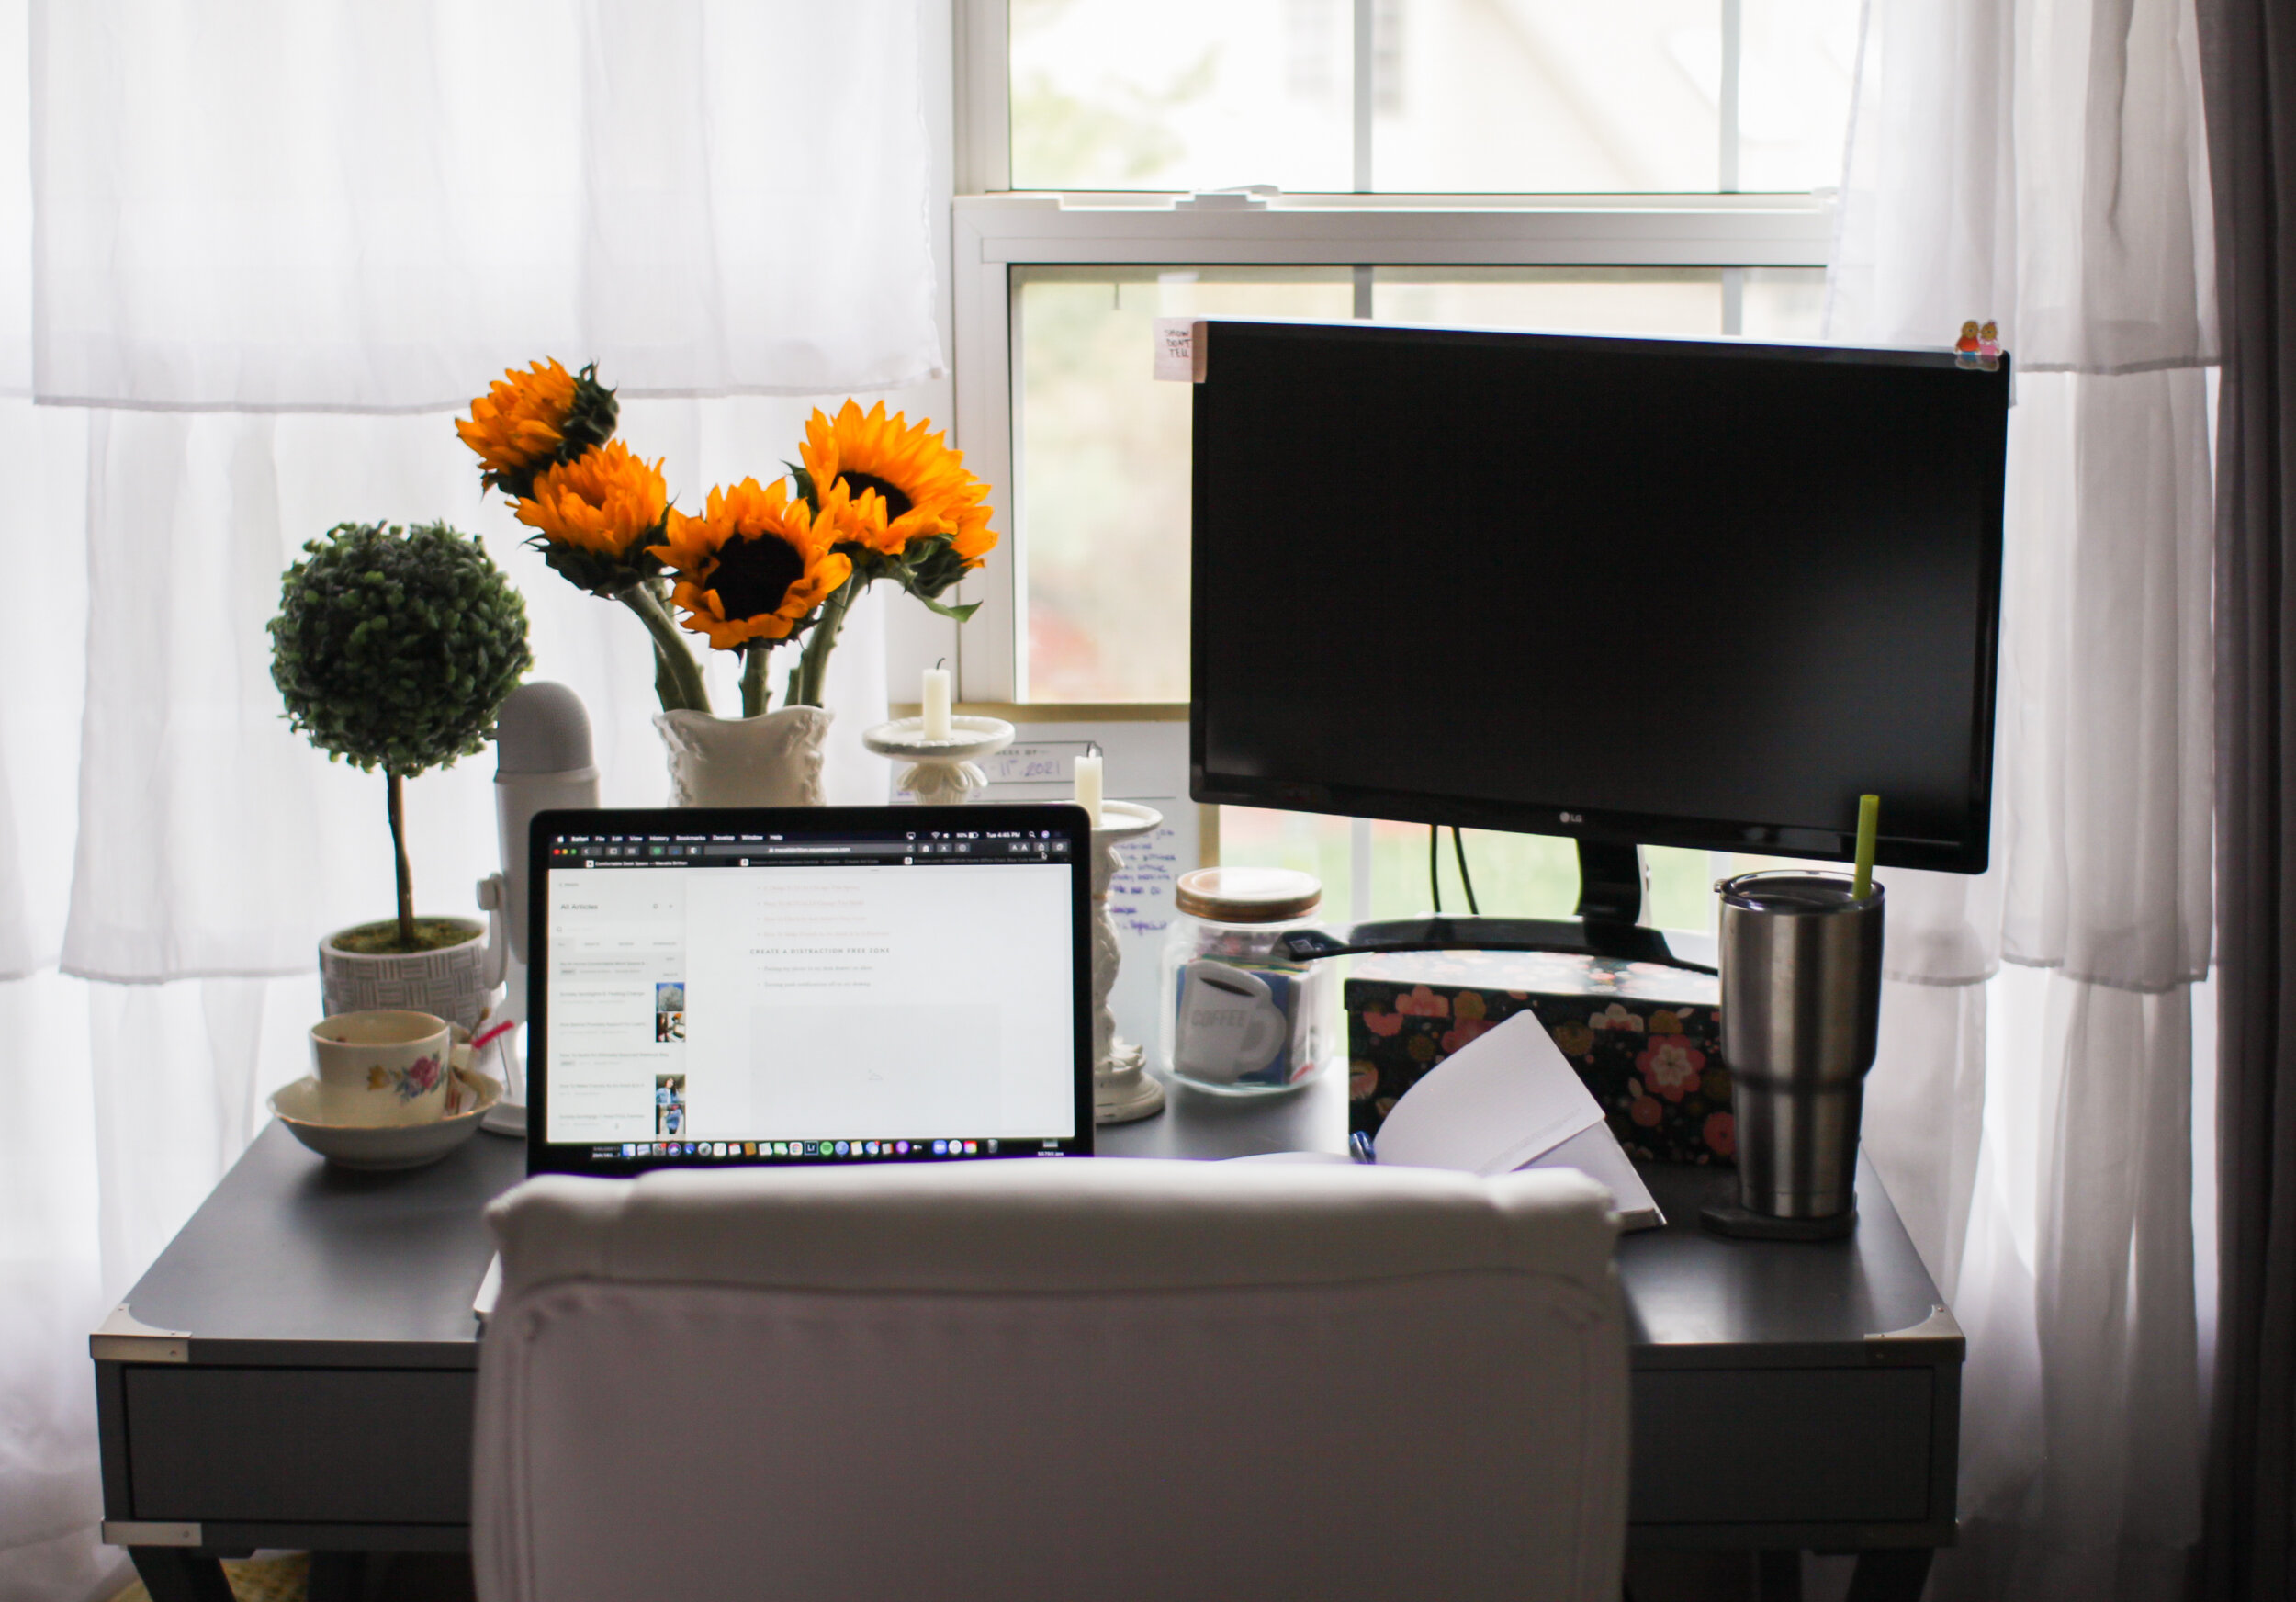 How to create a cozy and comfortable desk to work from home